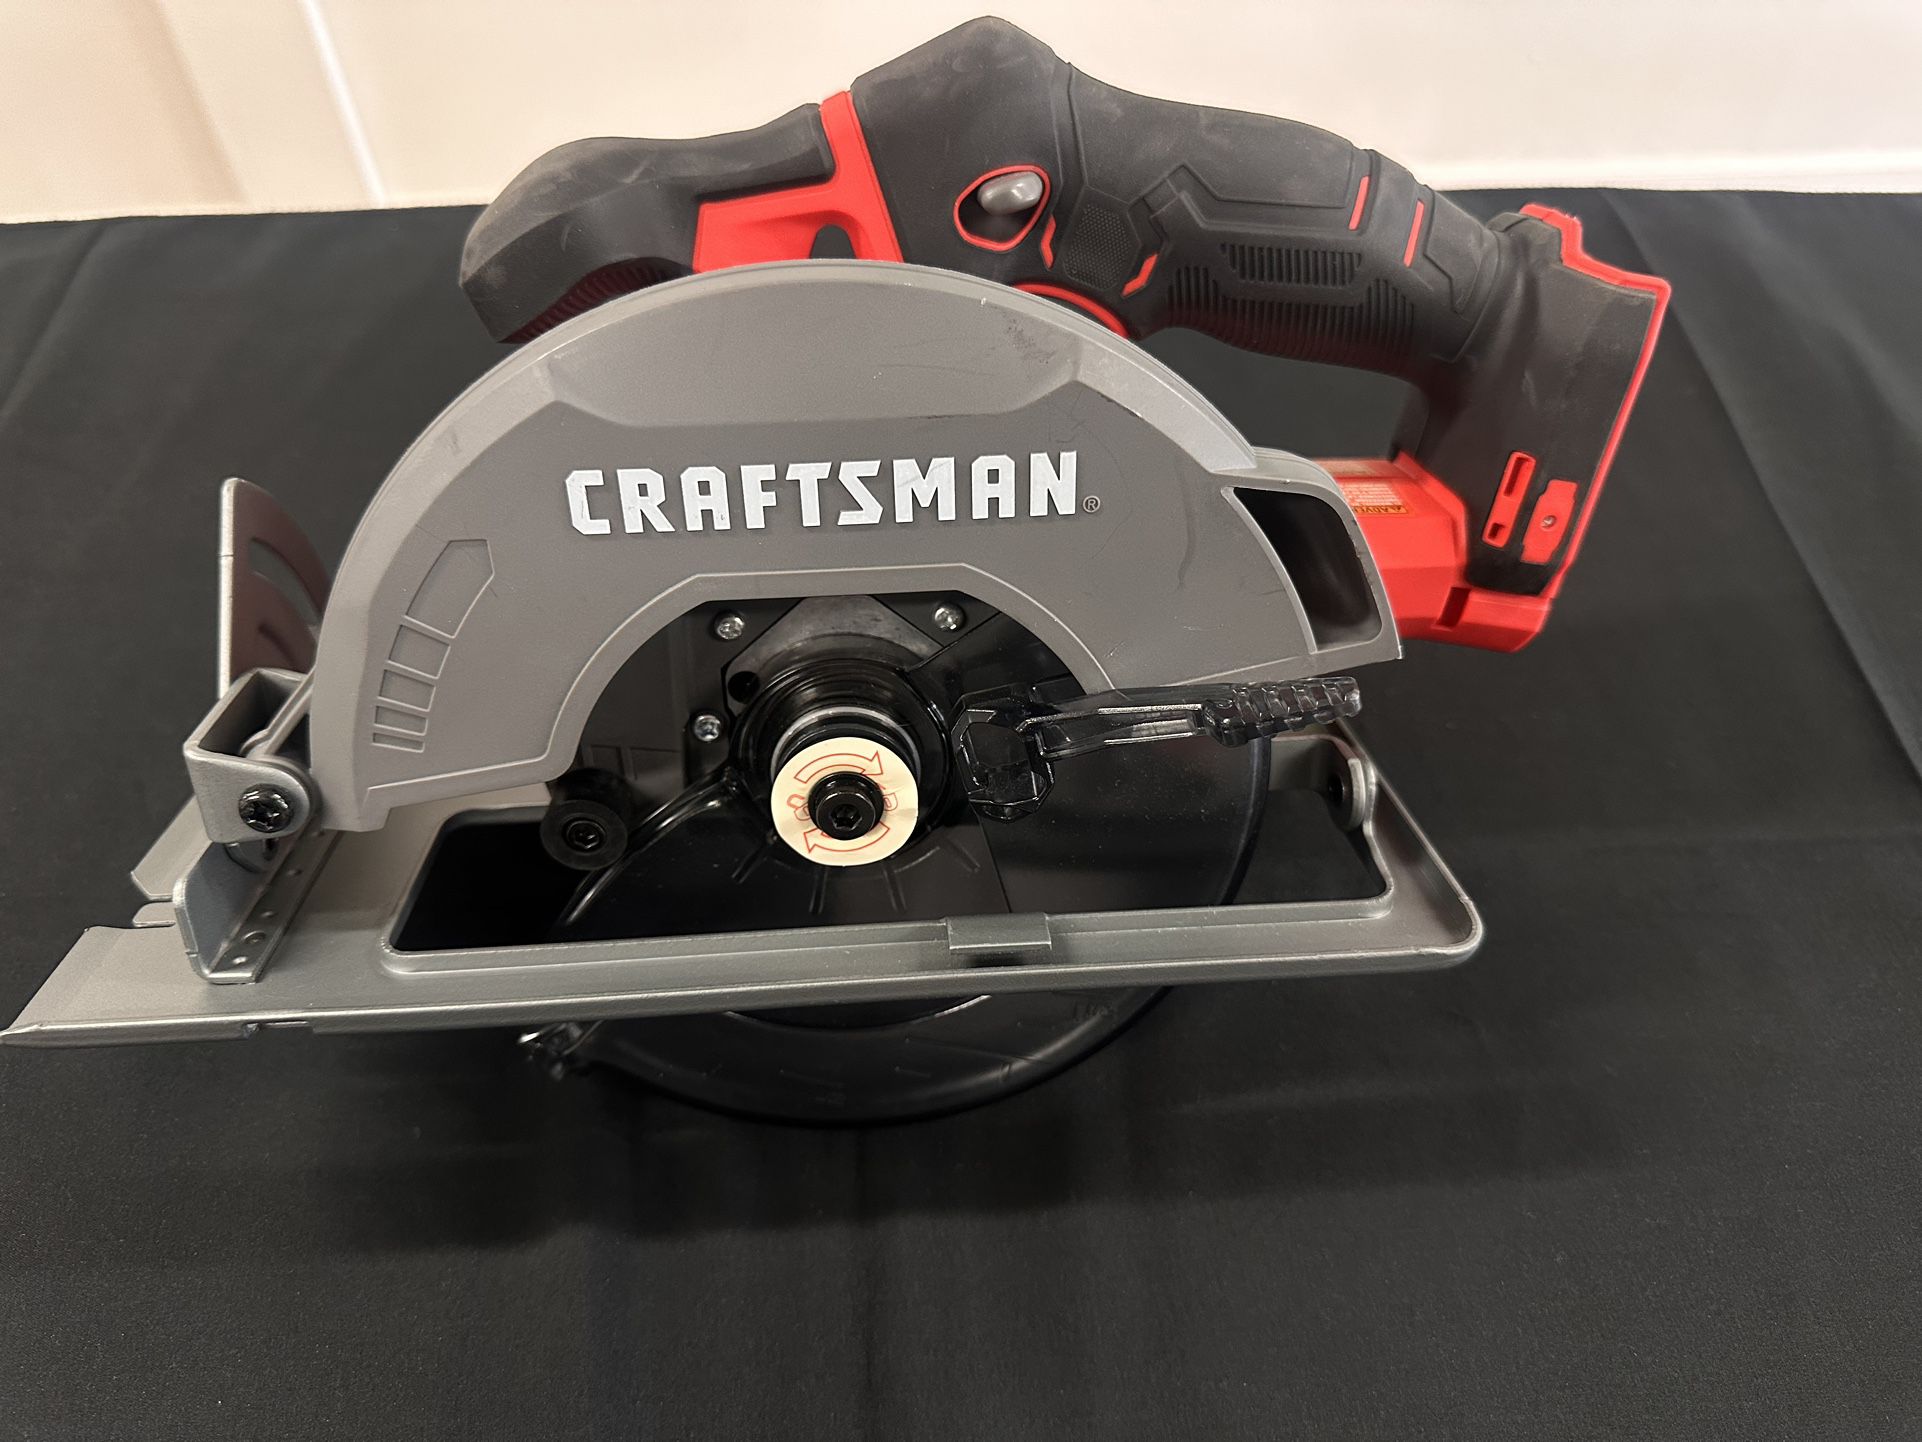 Craftsman V20 Cordless 6-1/2-in Circular Saw for Sale in Vista, CA OfferUp